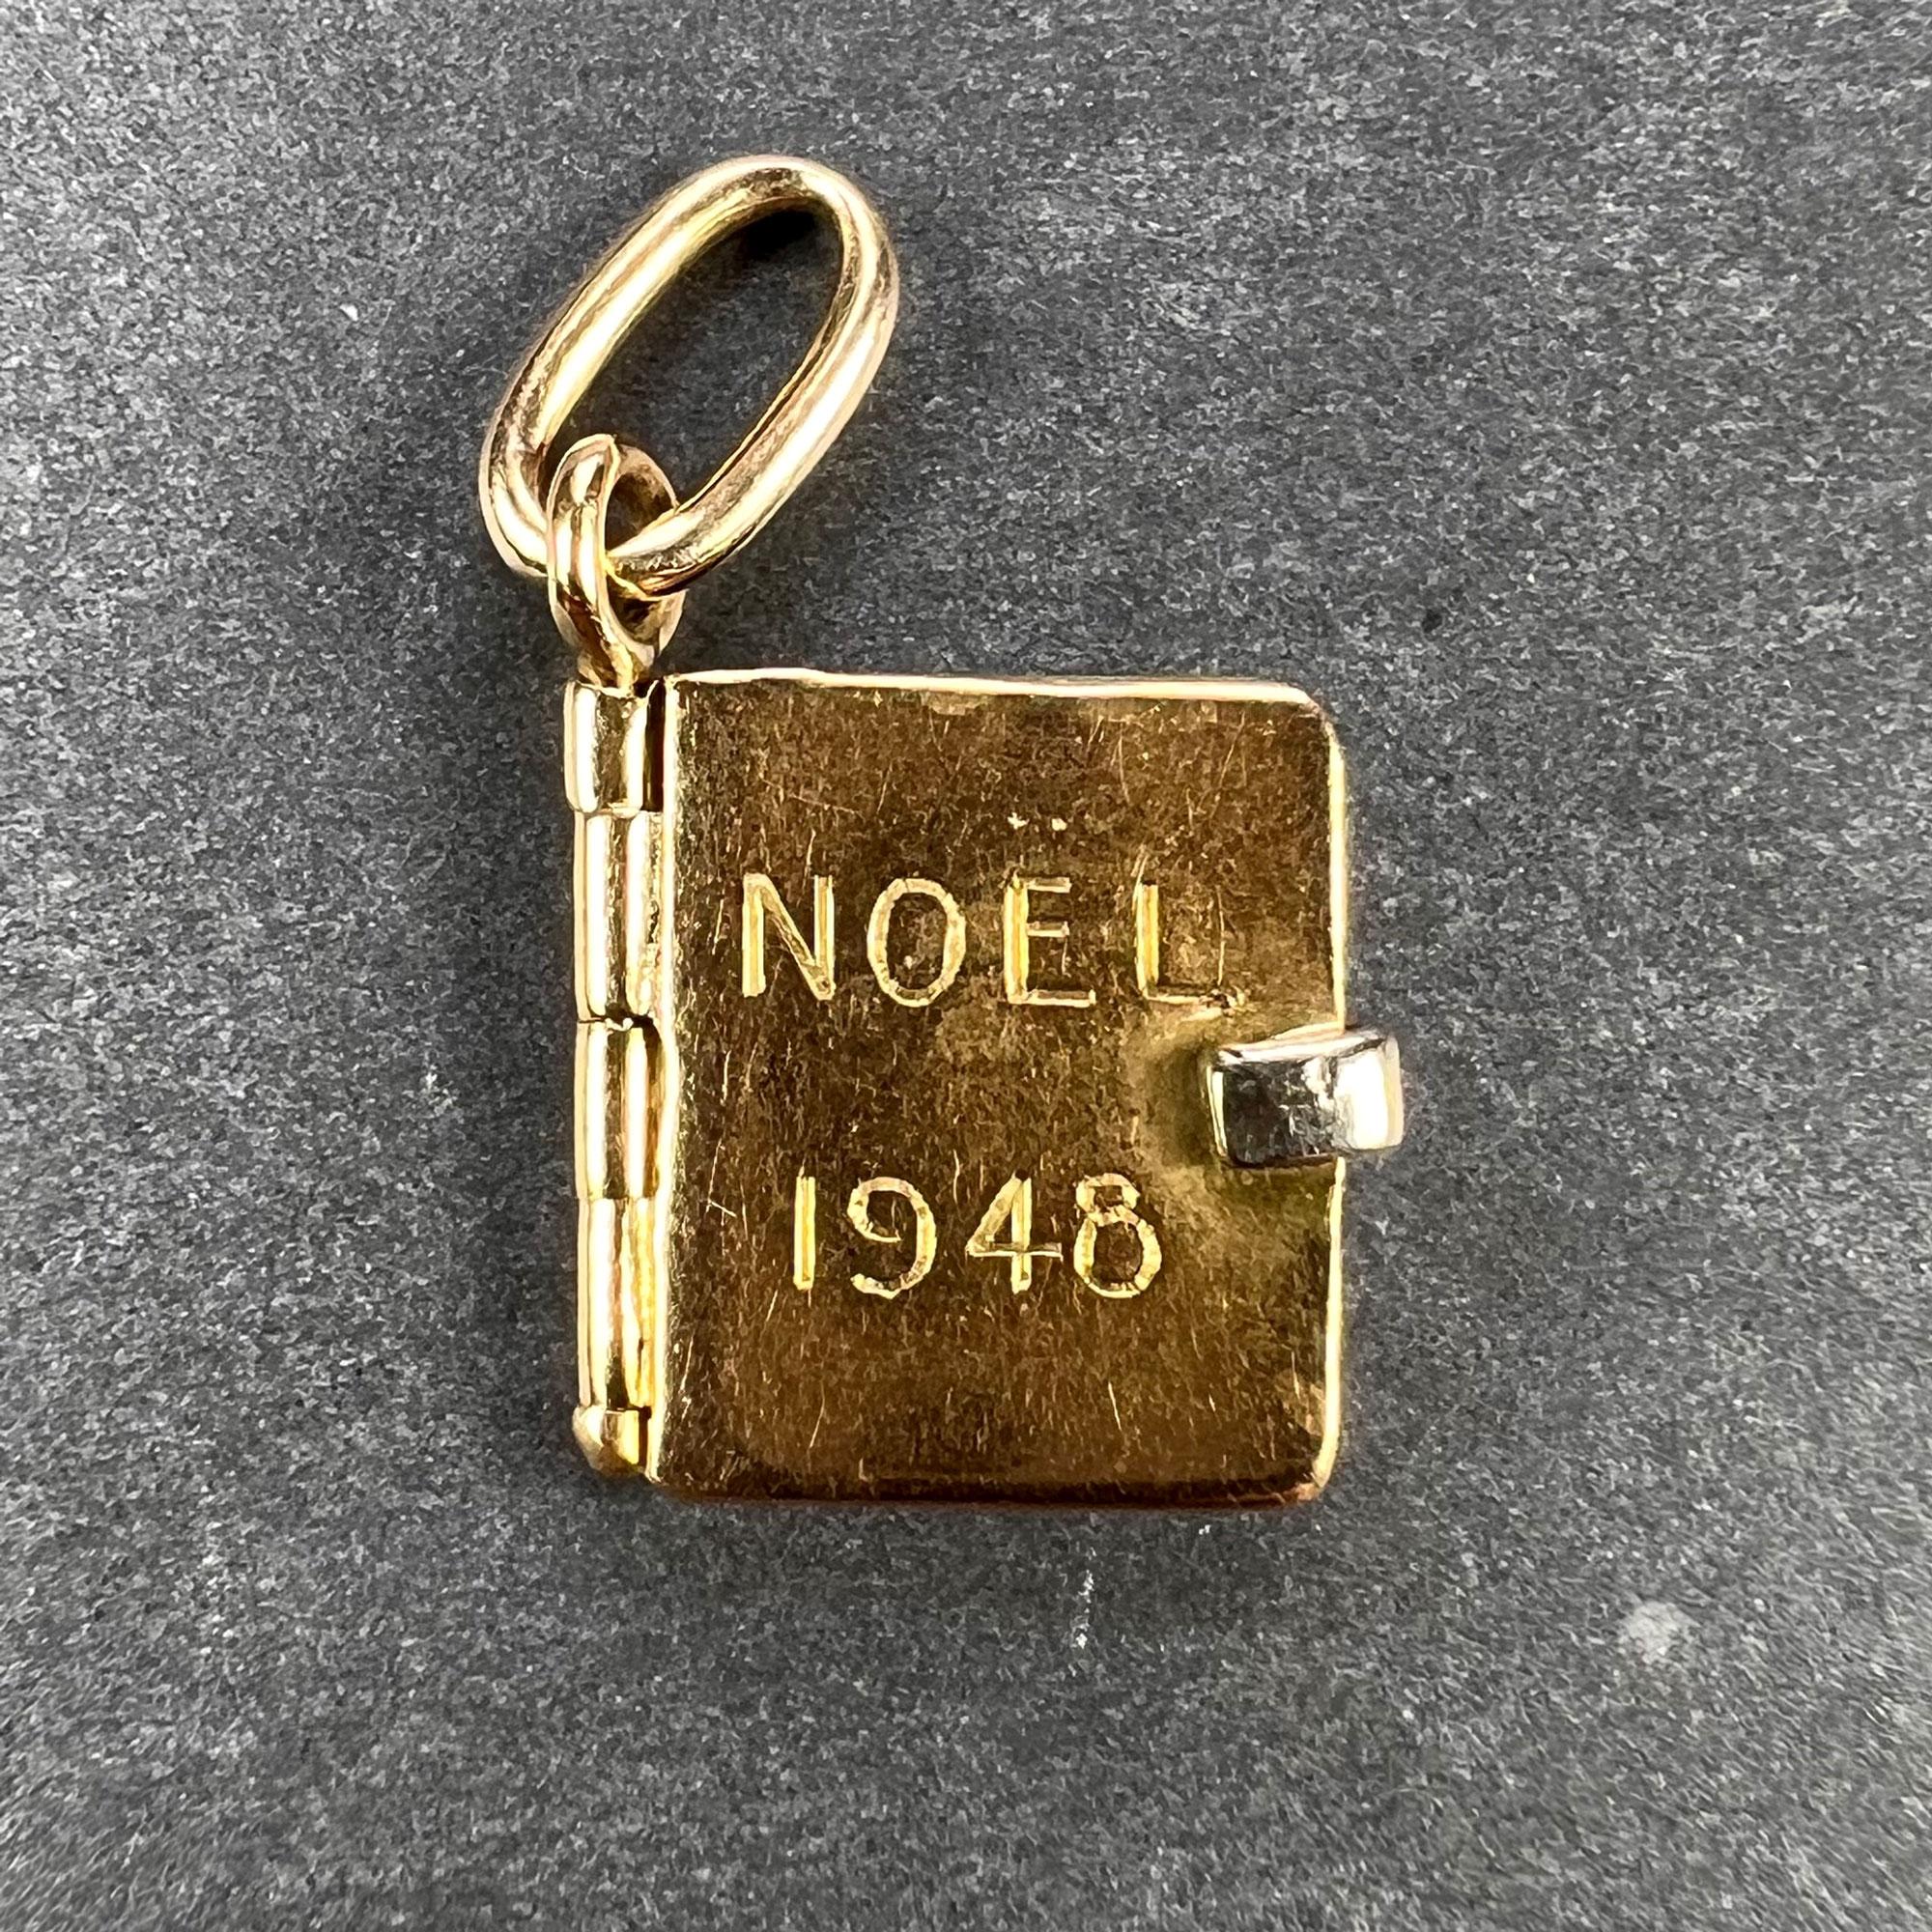 A French 18 karat (18K) yellow gold charm pendant designed as a book with three pages with a white gold clasp. Engraved to the front cover ‘Noel 1948’ for Christmas 1948, and inscribed to the second page ‘Bernard a Odette’. Unmarked but tested as 18